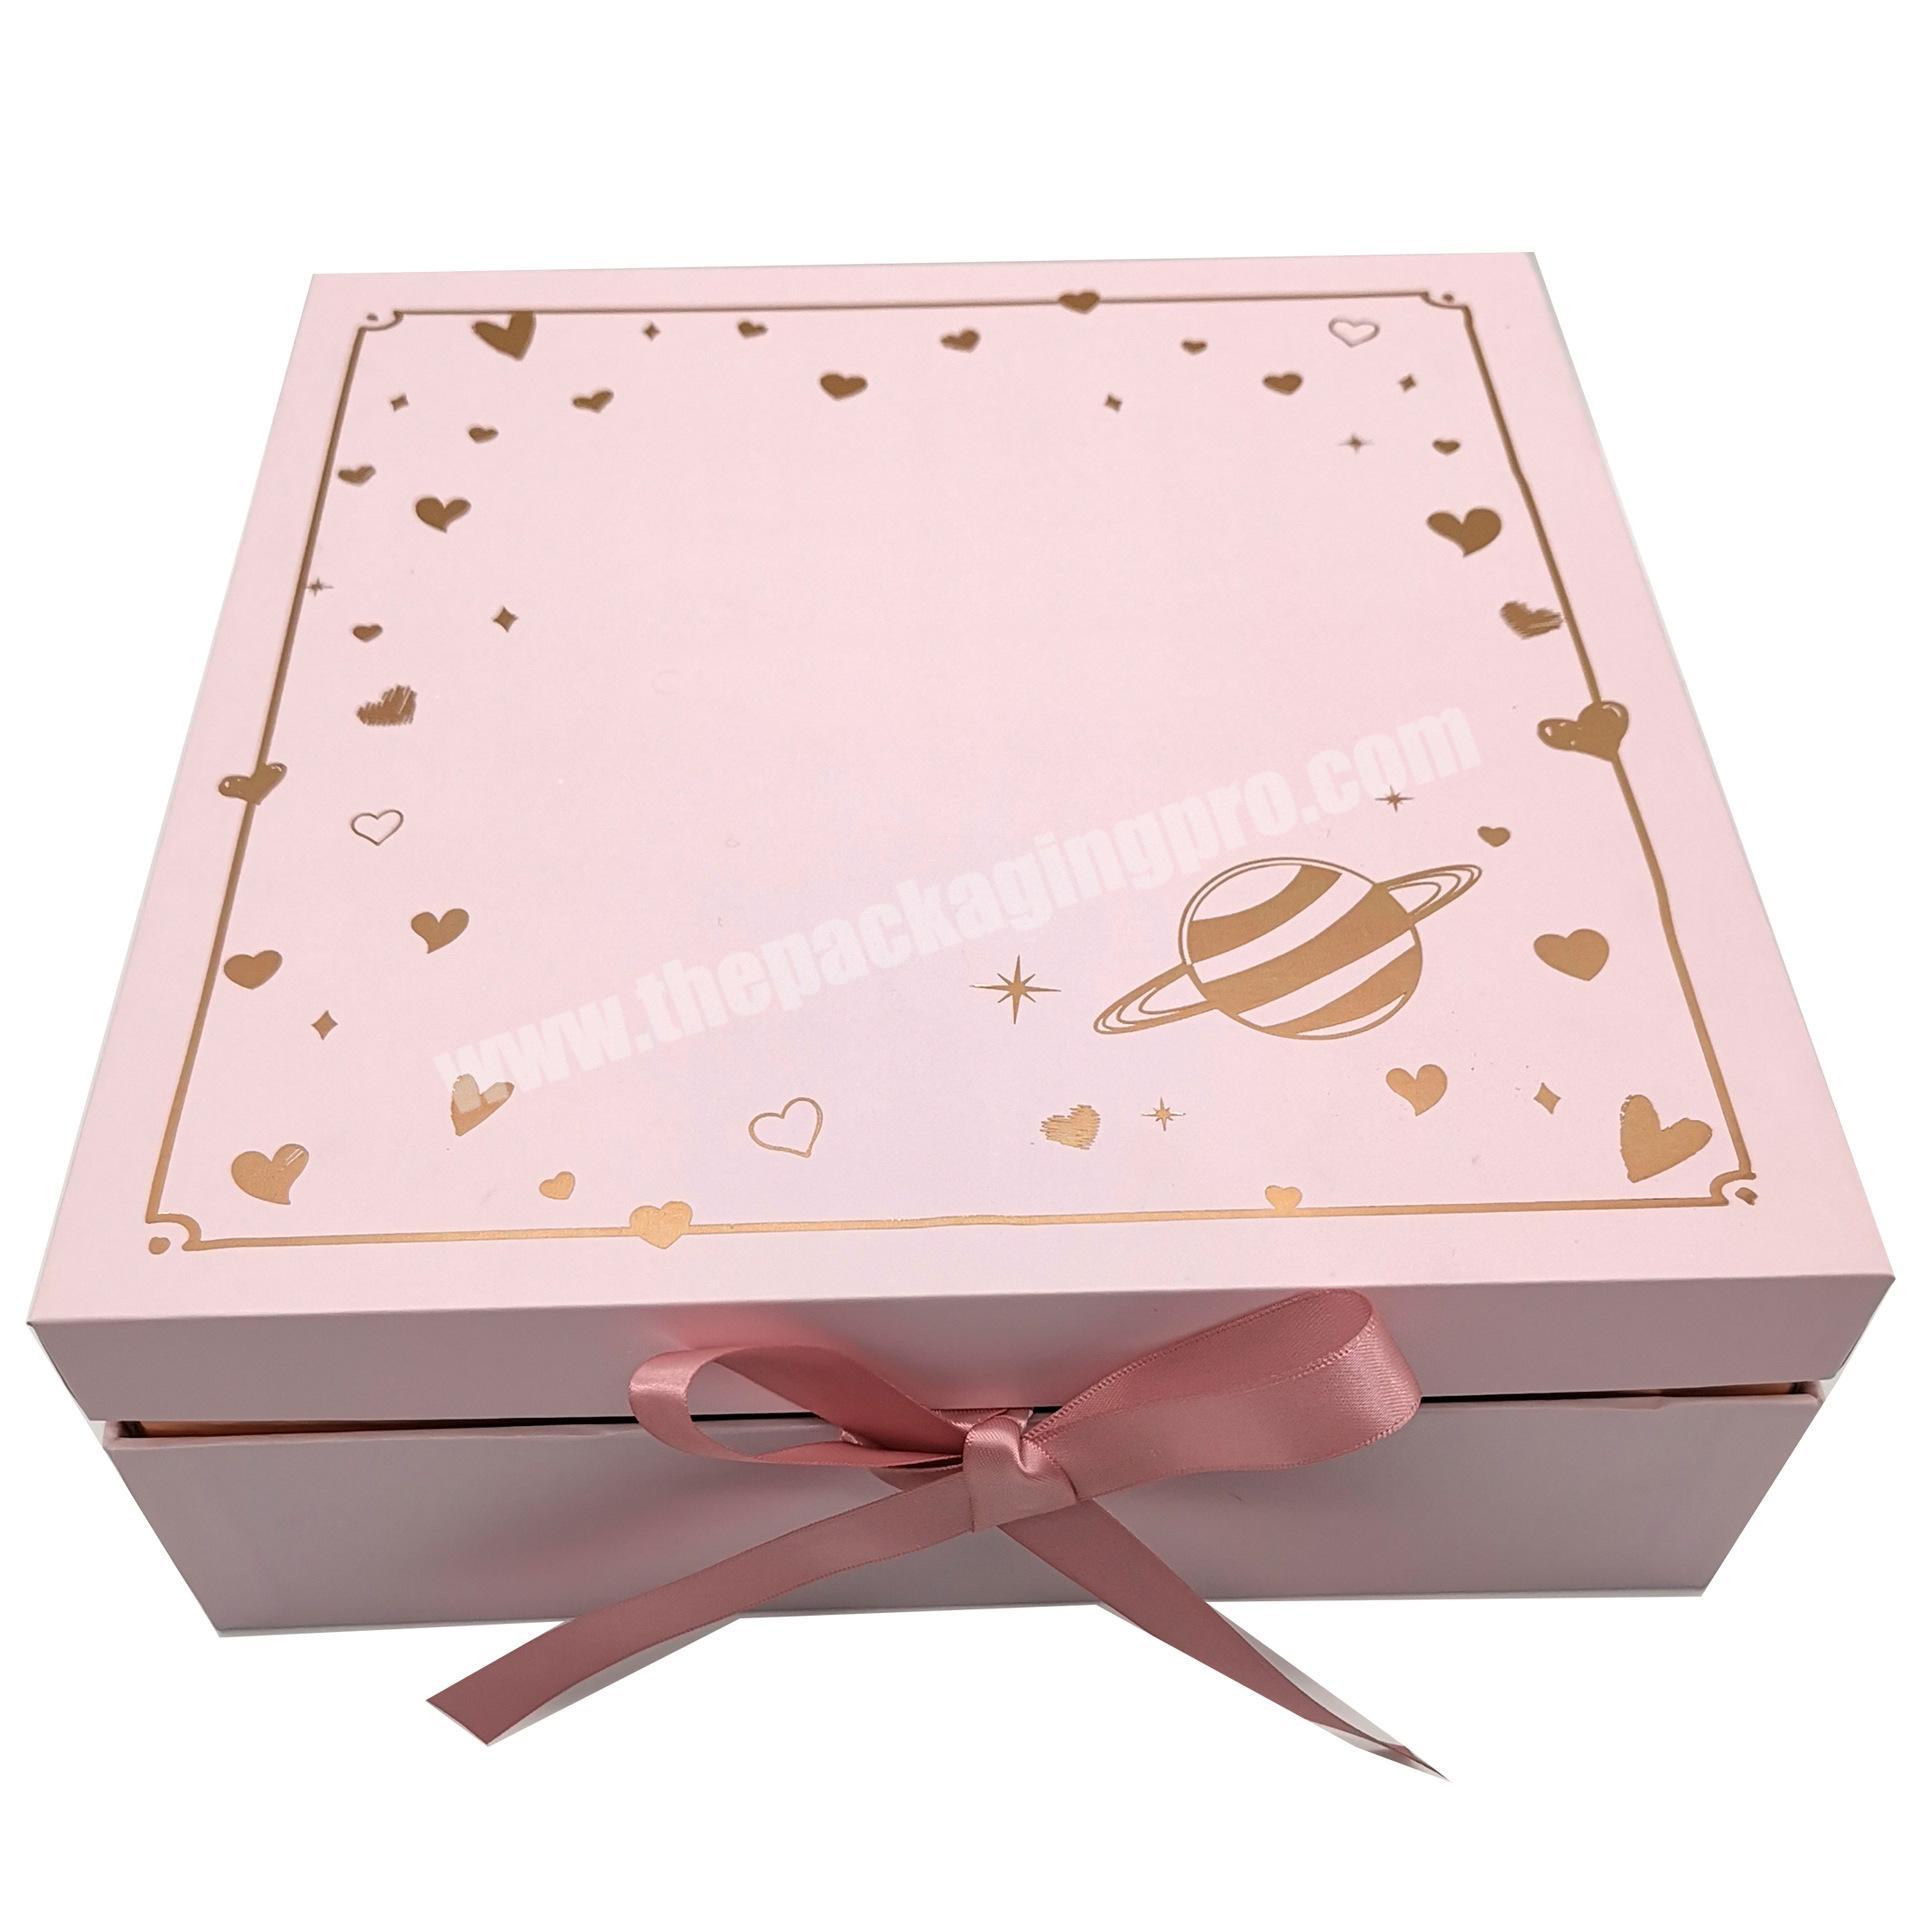 Wholesale Malaysia Customer Design Aromatherapy Bottles Gift Ribbon Pink Box Packing With Gold Foil Logo Printing